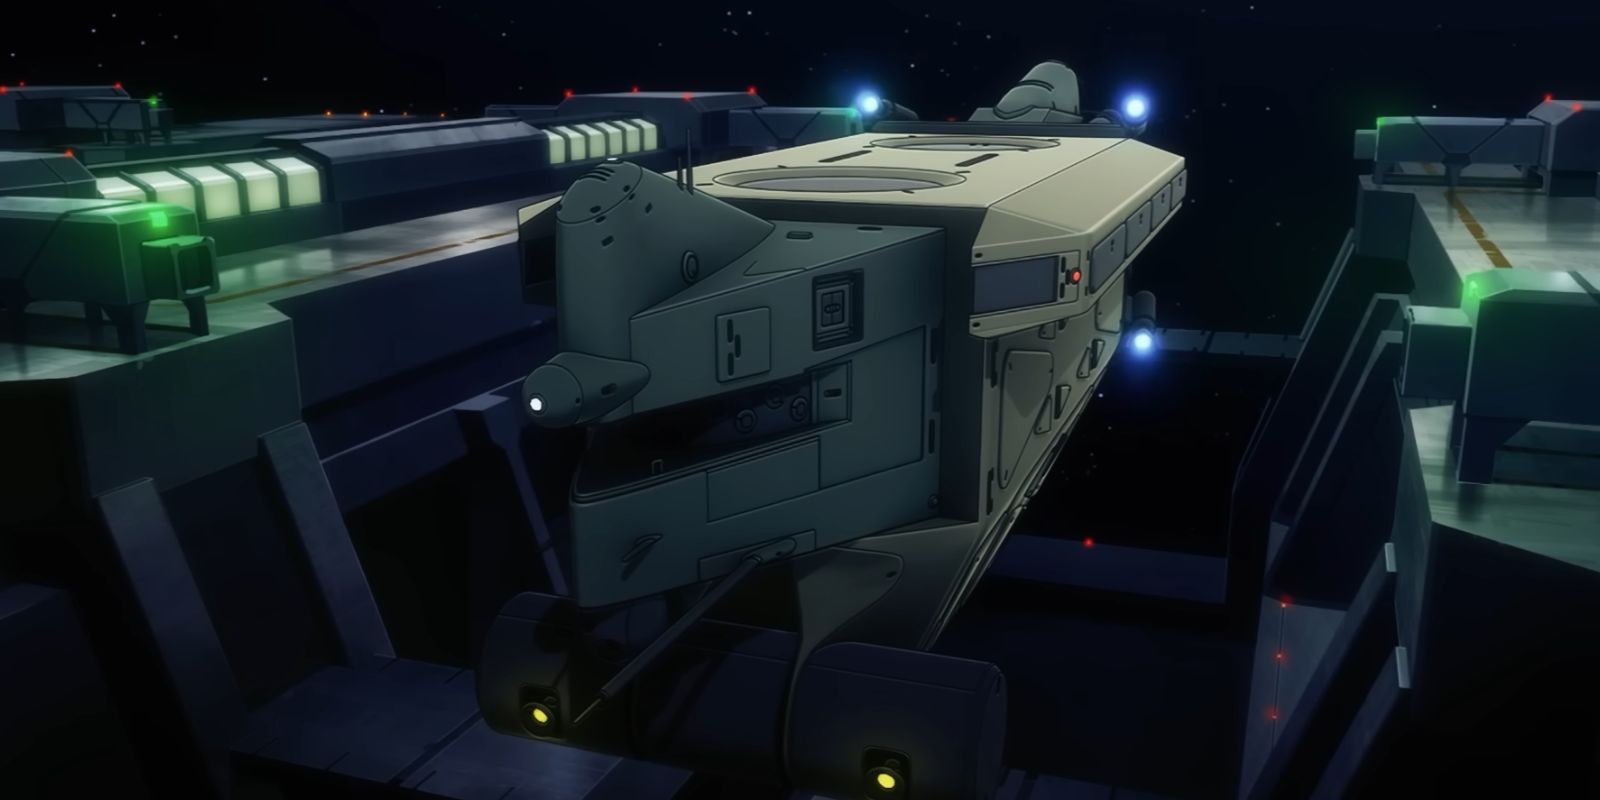 Gundam Witch From Mercury Prologue Ship Gets Invaded Star Wars Han Solo Millenium Falcon